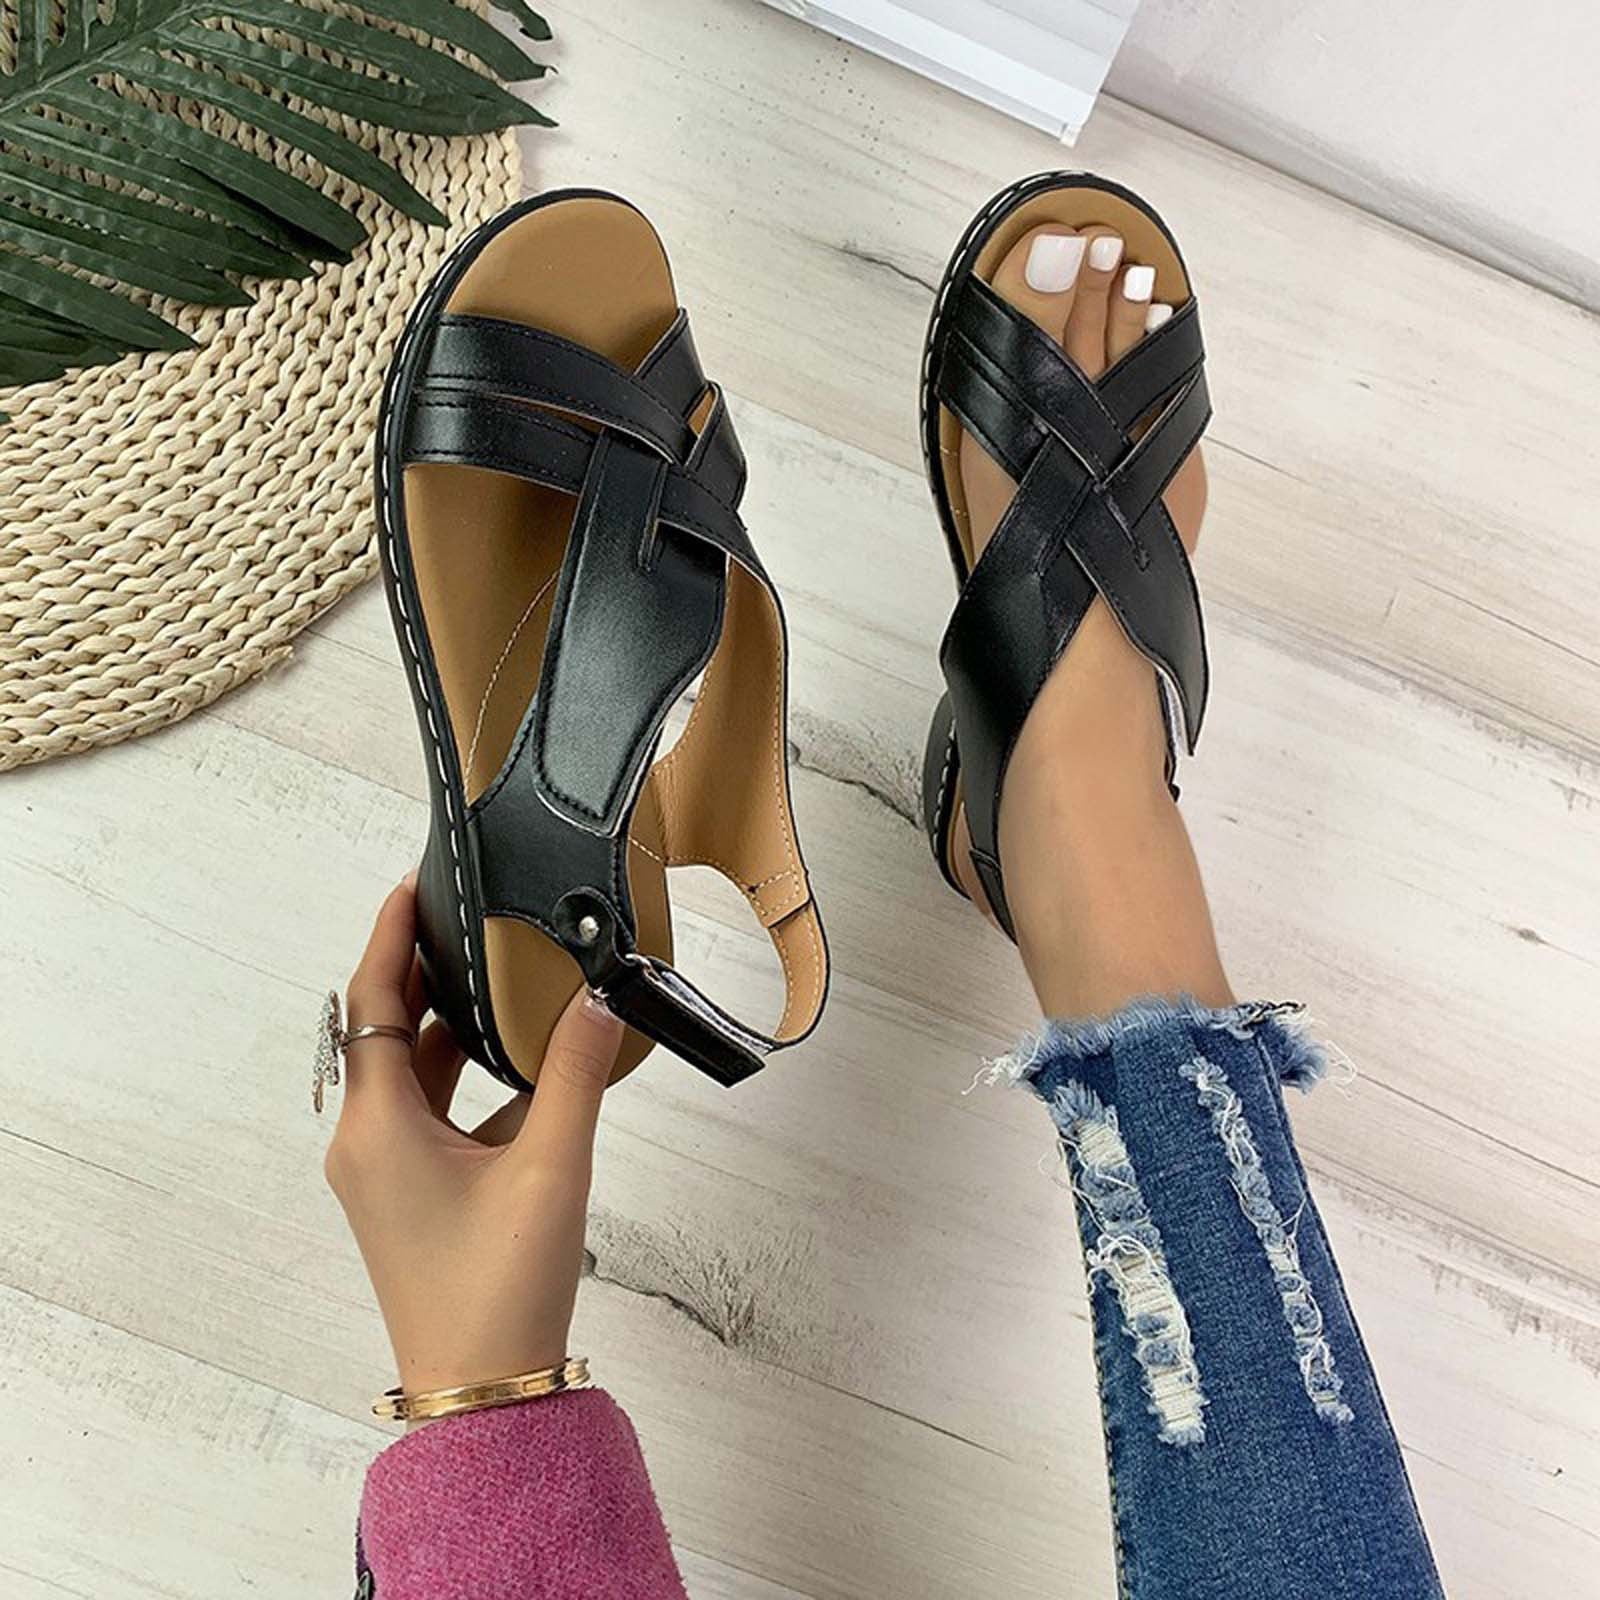 CTEEGC Womens Sandals Orthopedic Sandals Heightening Shoes Hollowed Out  Flat Heels Peep-Toe Casual Shoes 